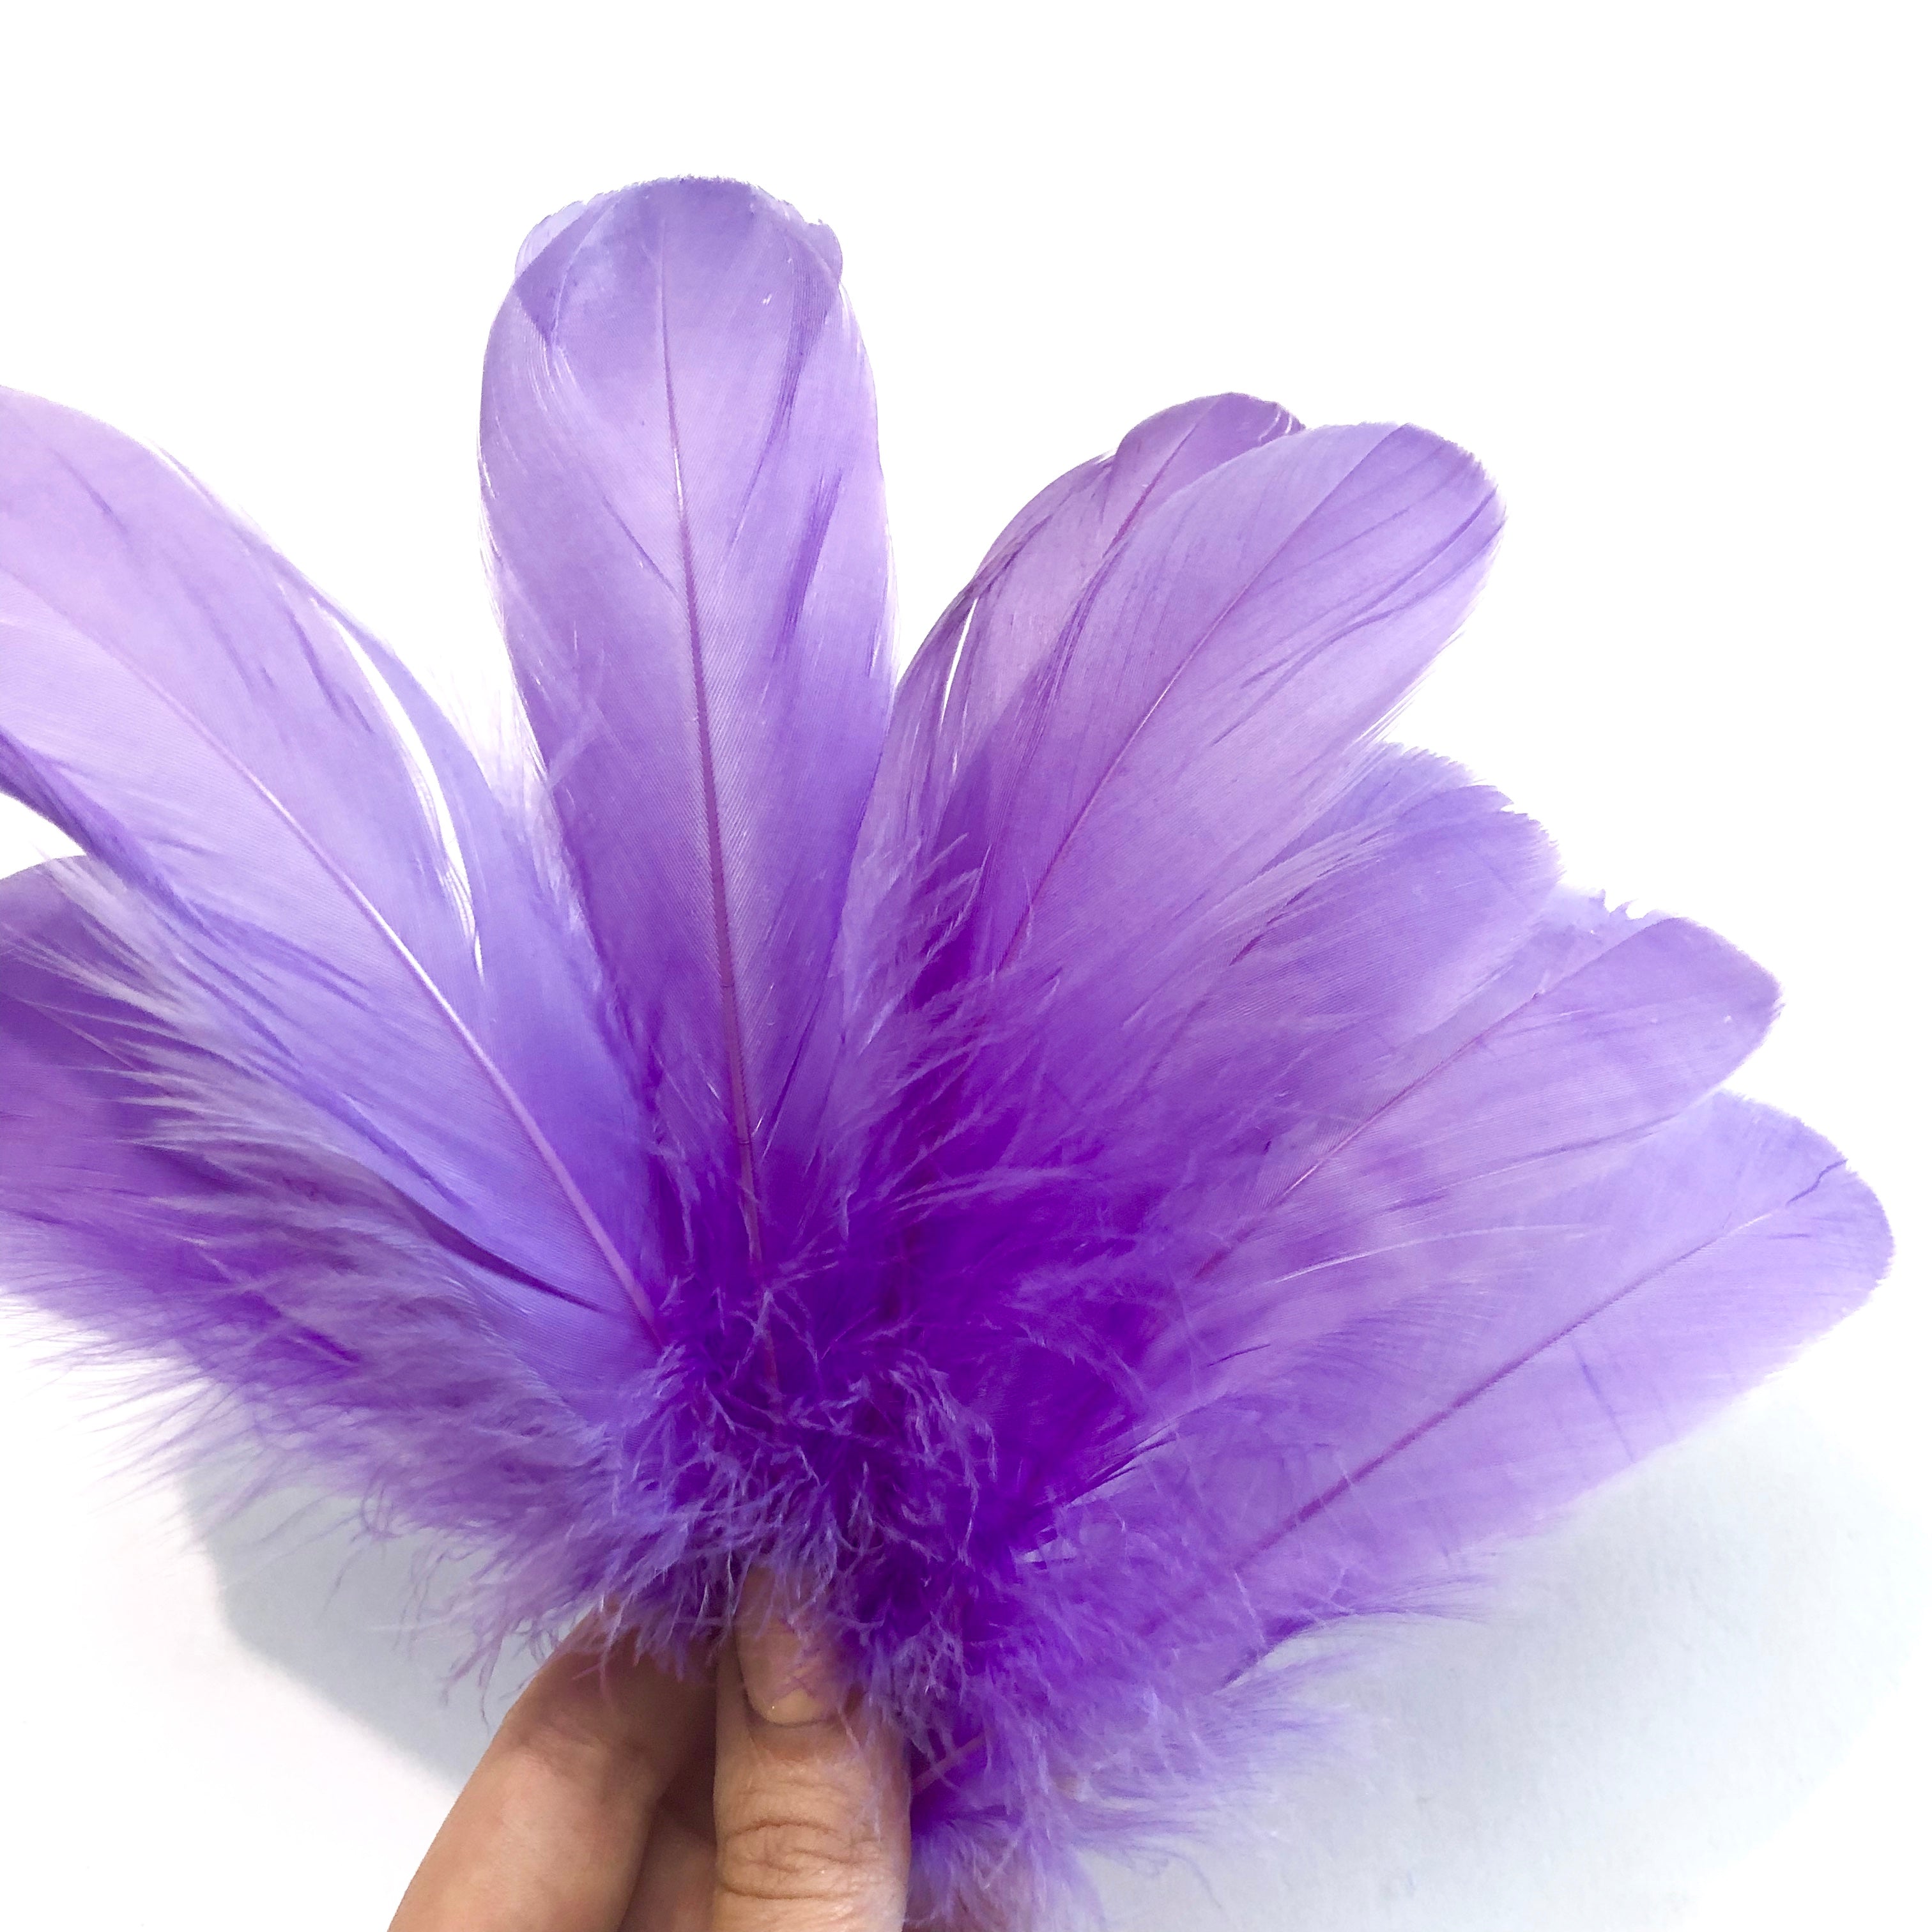 Goose Nagoire Feathers 10 grams - Purple